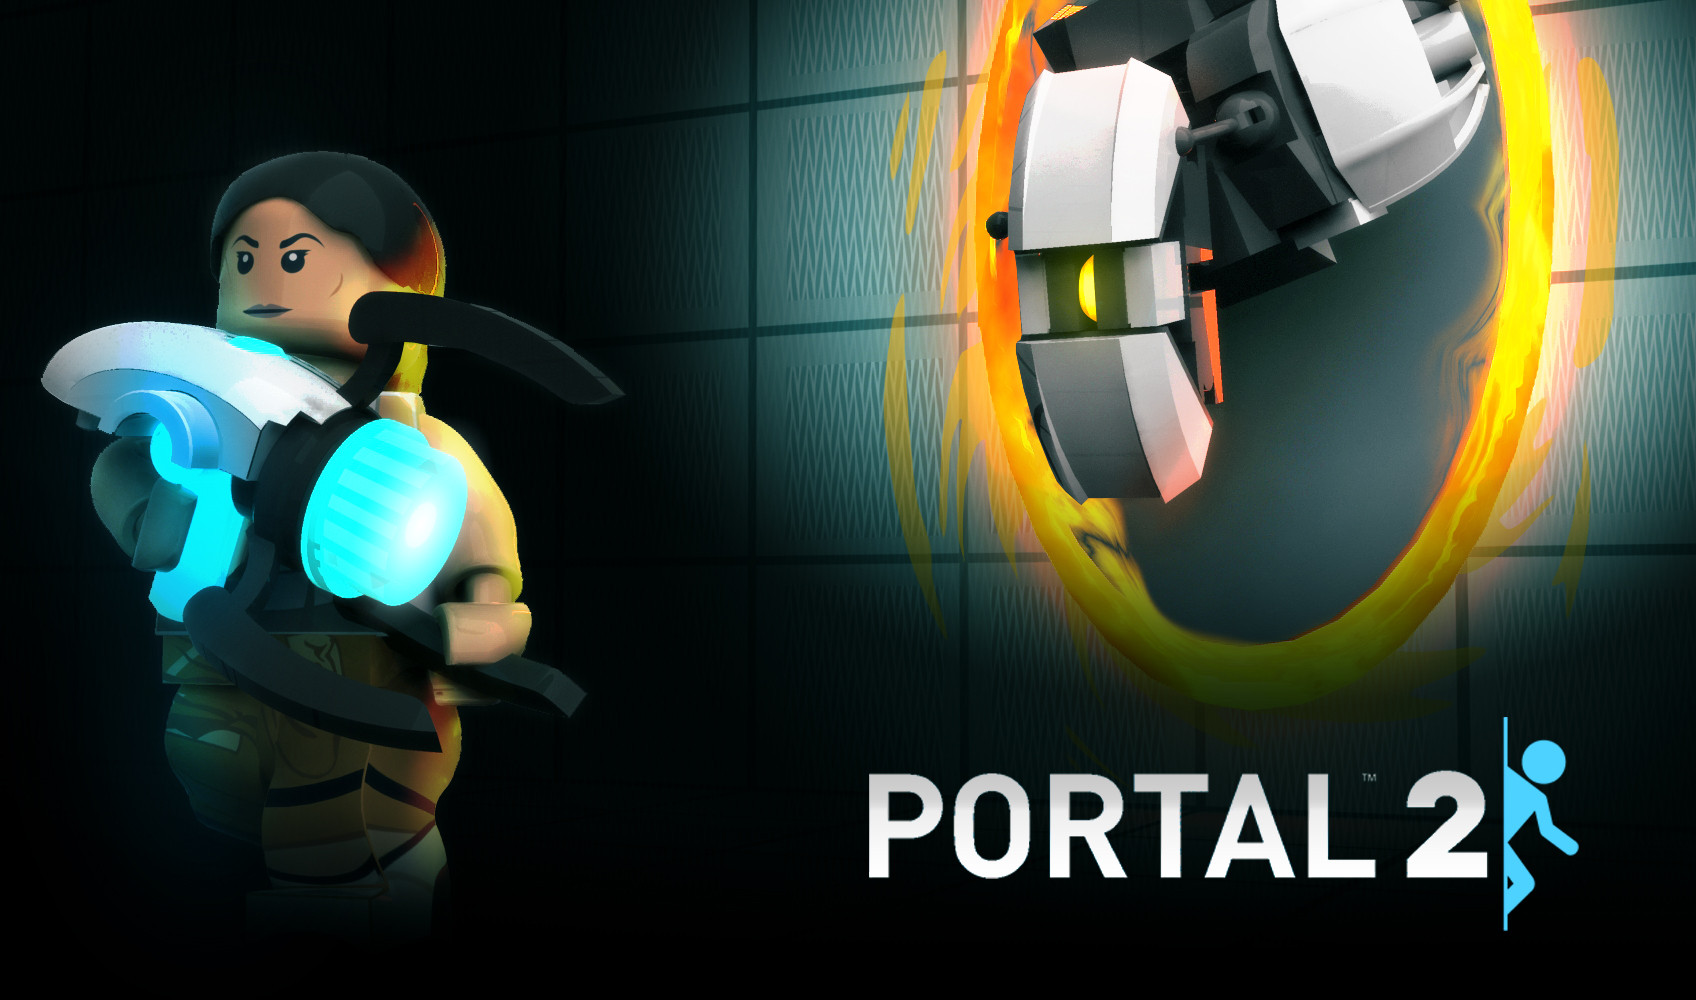 Portal Spotted on LEGO Dimensions packagaing